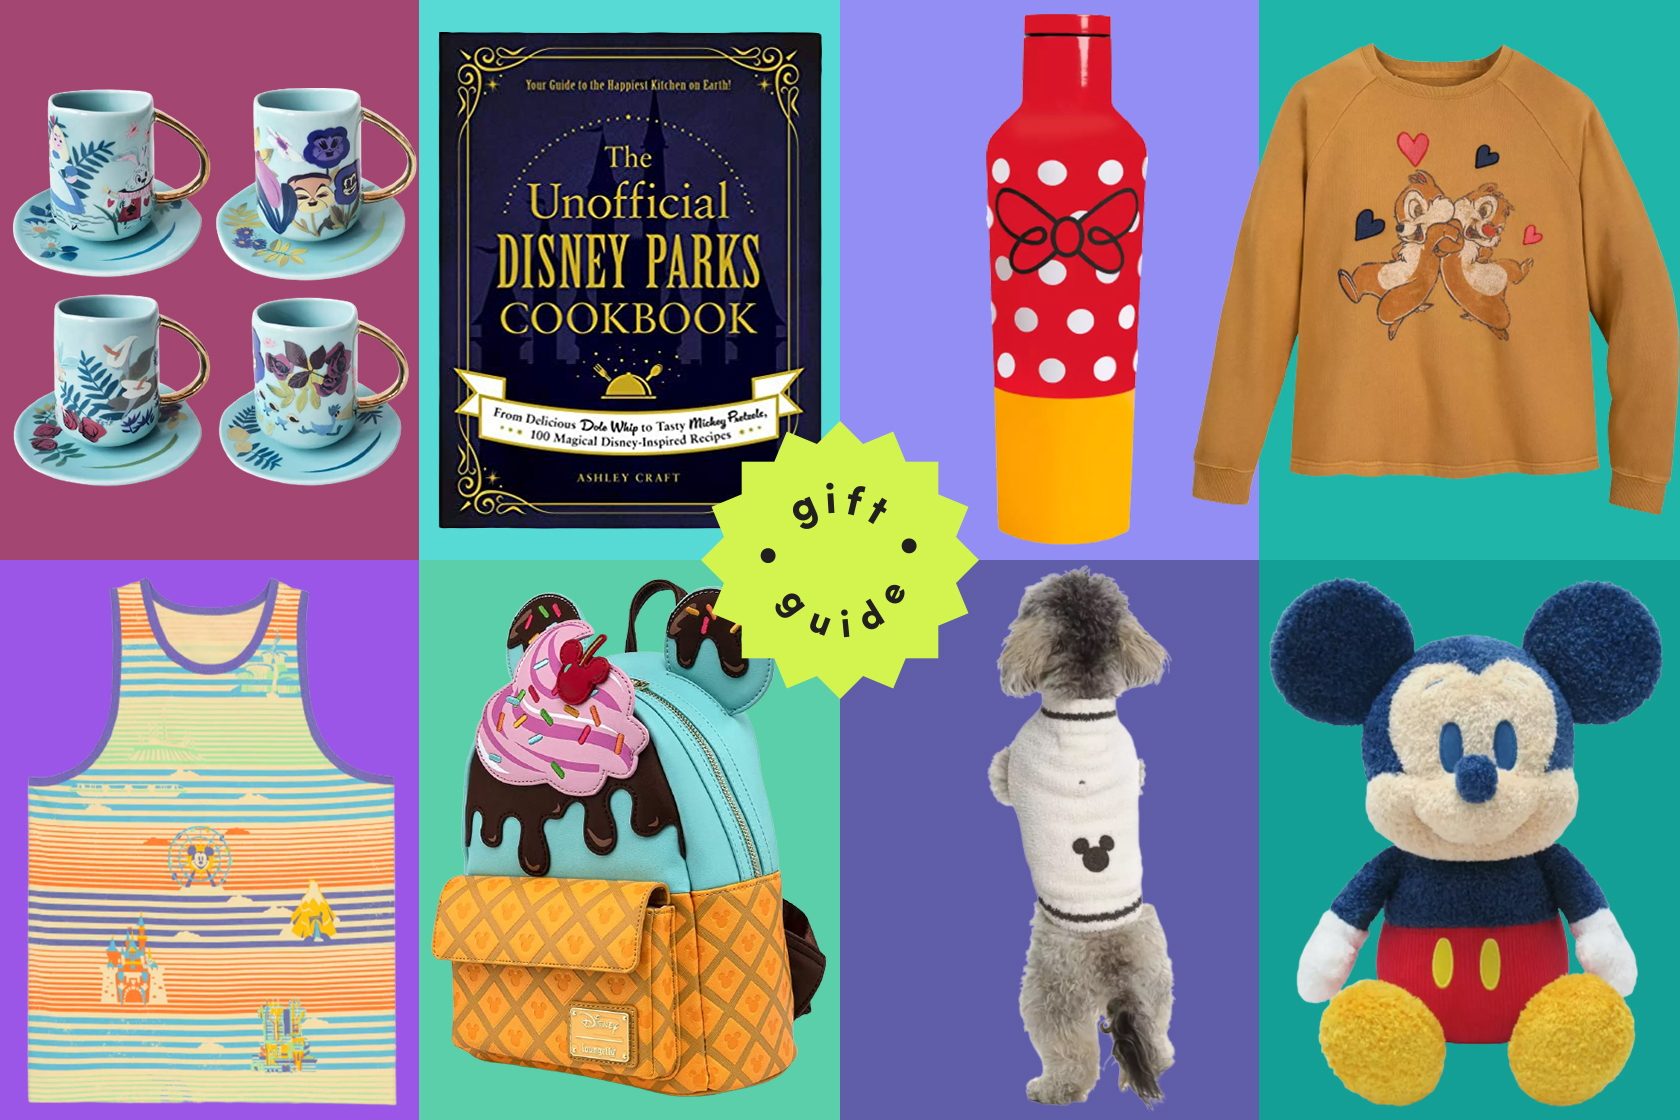 Unique gifts for the Disney Lover - Disney in your Day